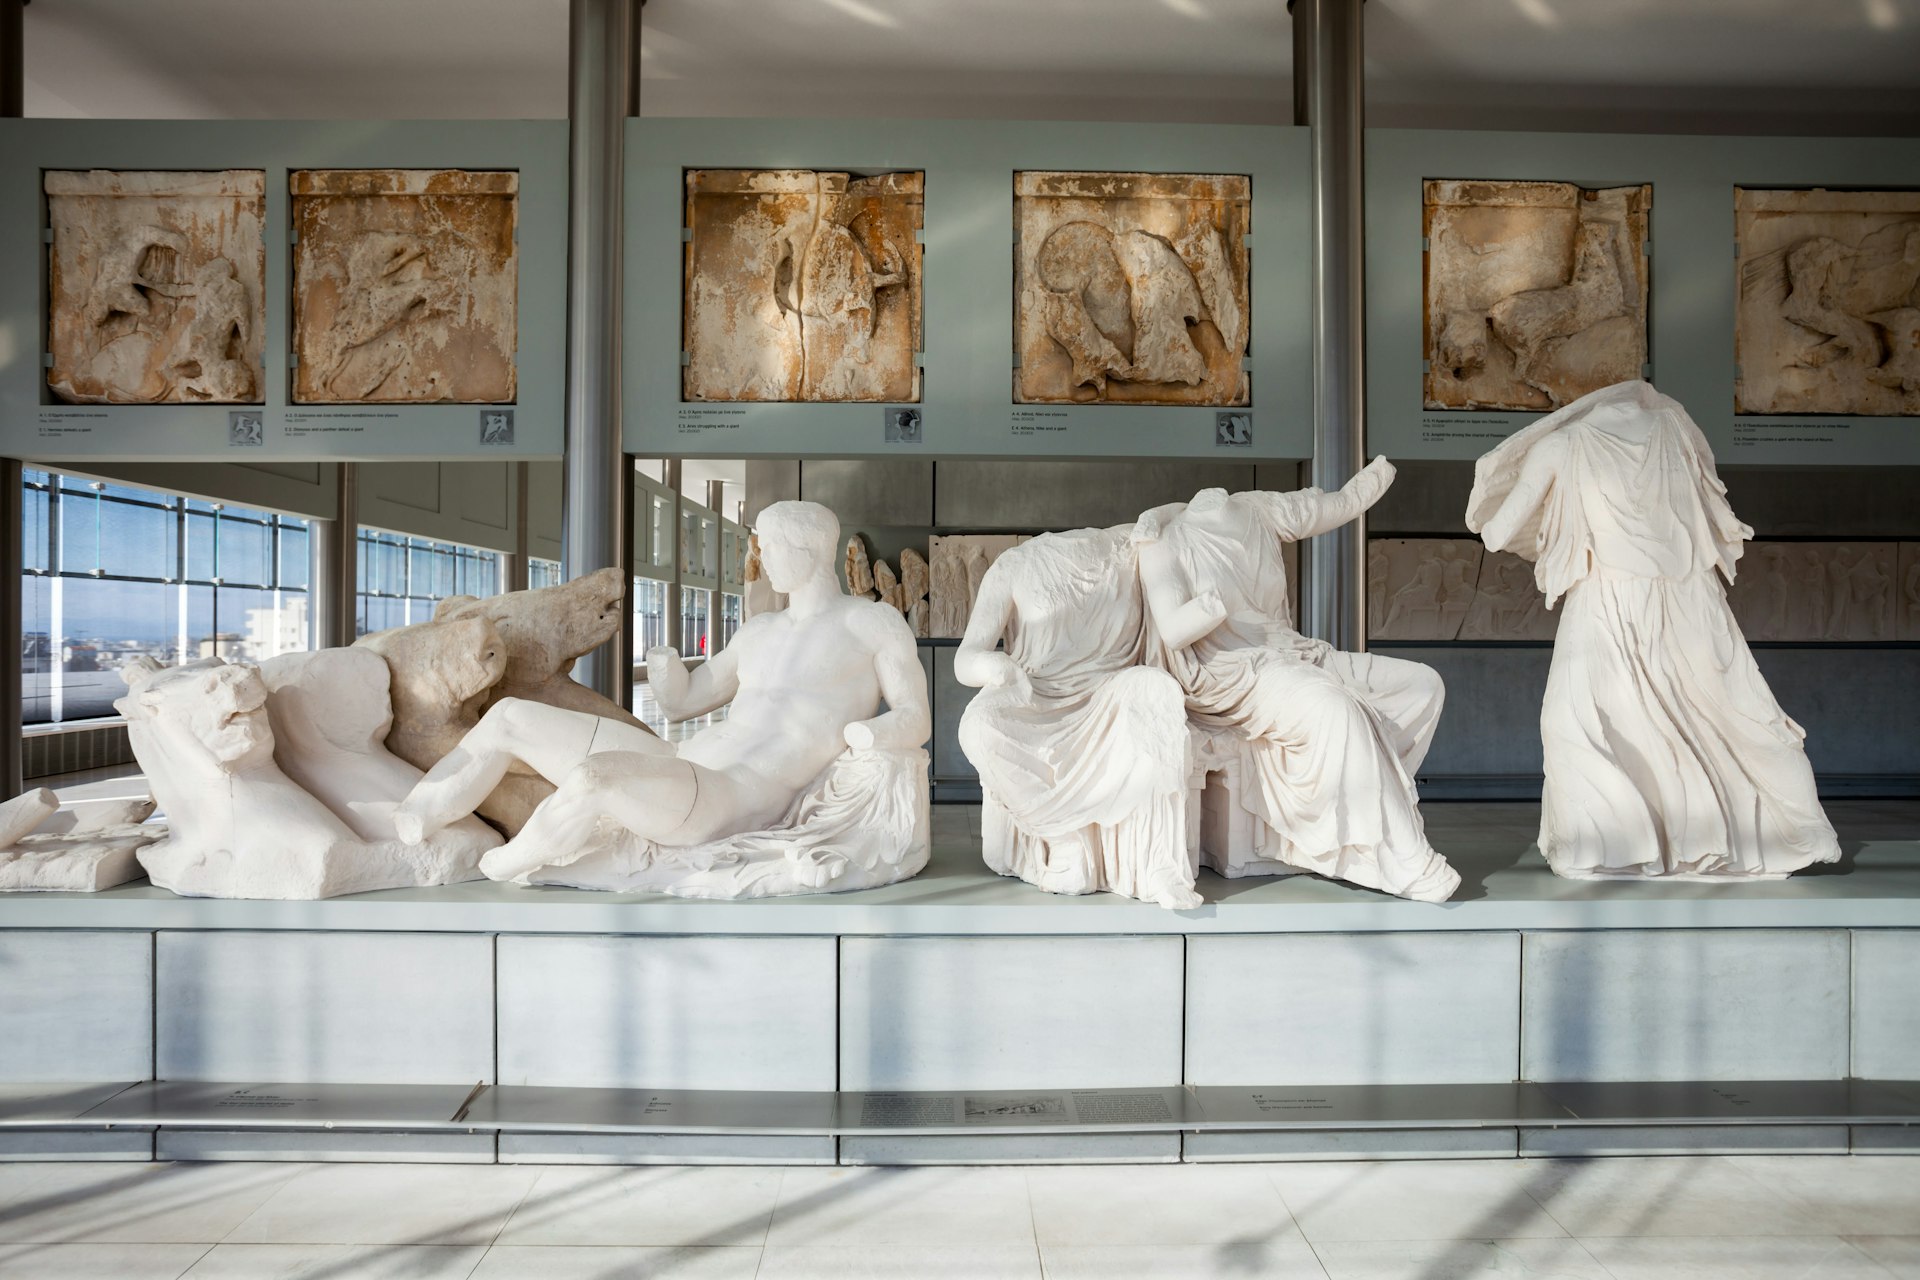 Several statues on display at the Acropolis Museum, an archaeological museum focused on the findings of the archaeological site of the Acropolis of Athens in Greece